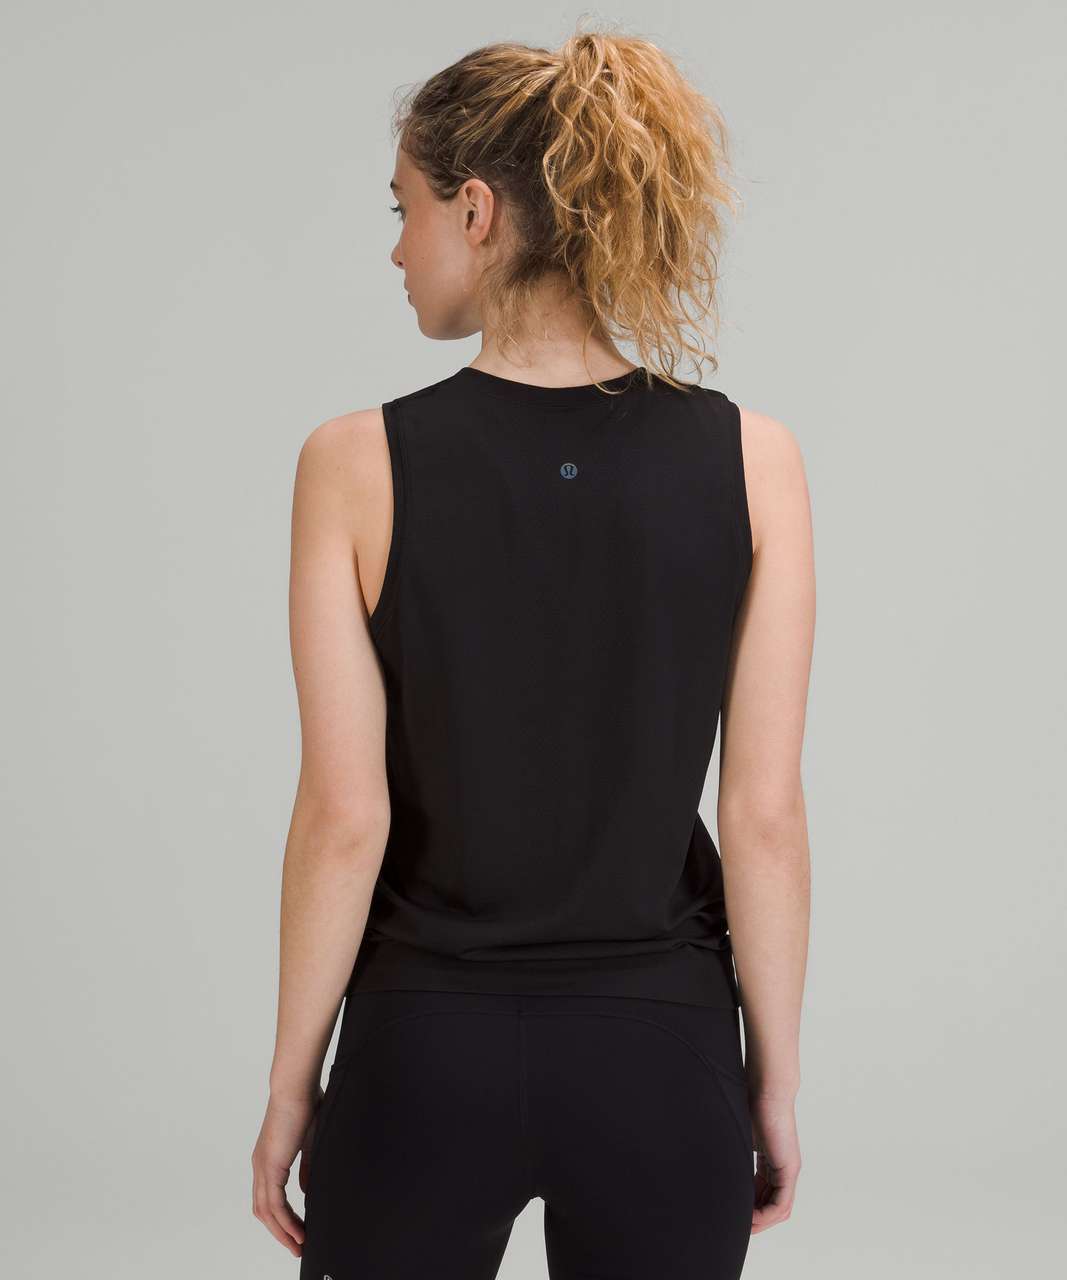 Lululemon Swiftly Relaxed Muscle Tank Top - Black / Black